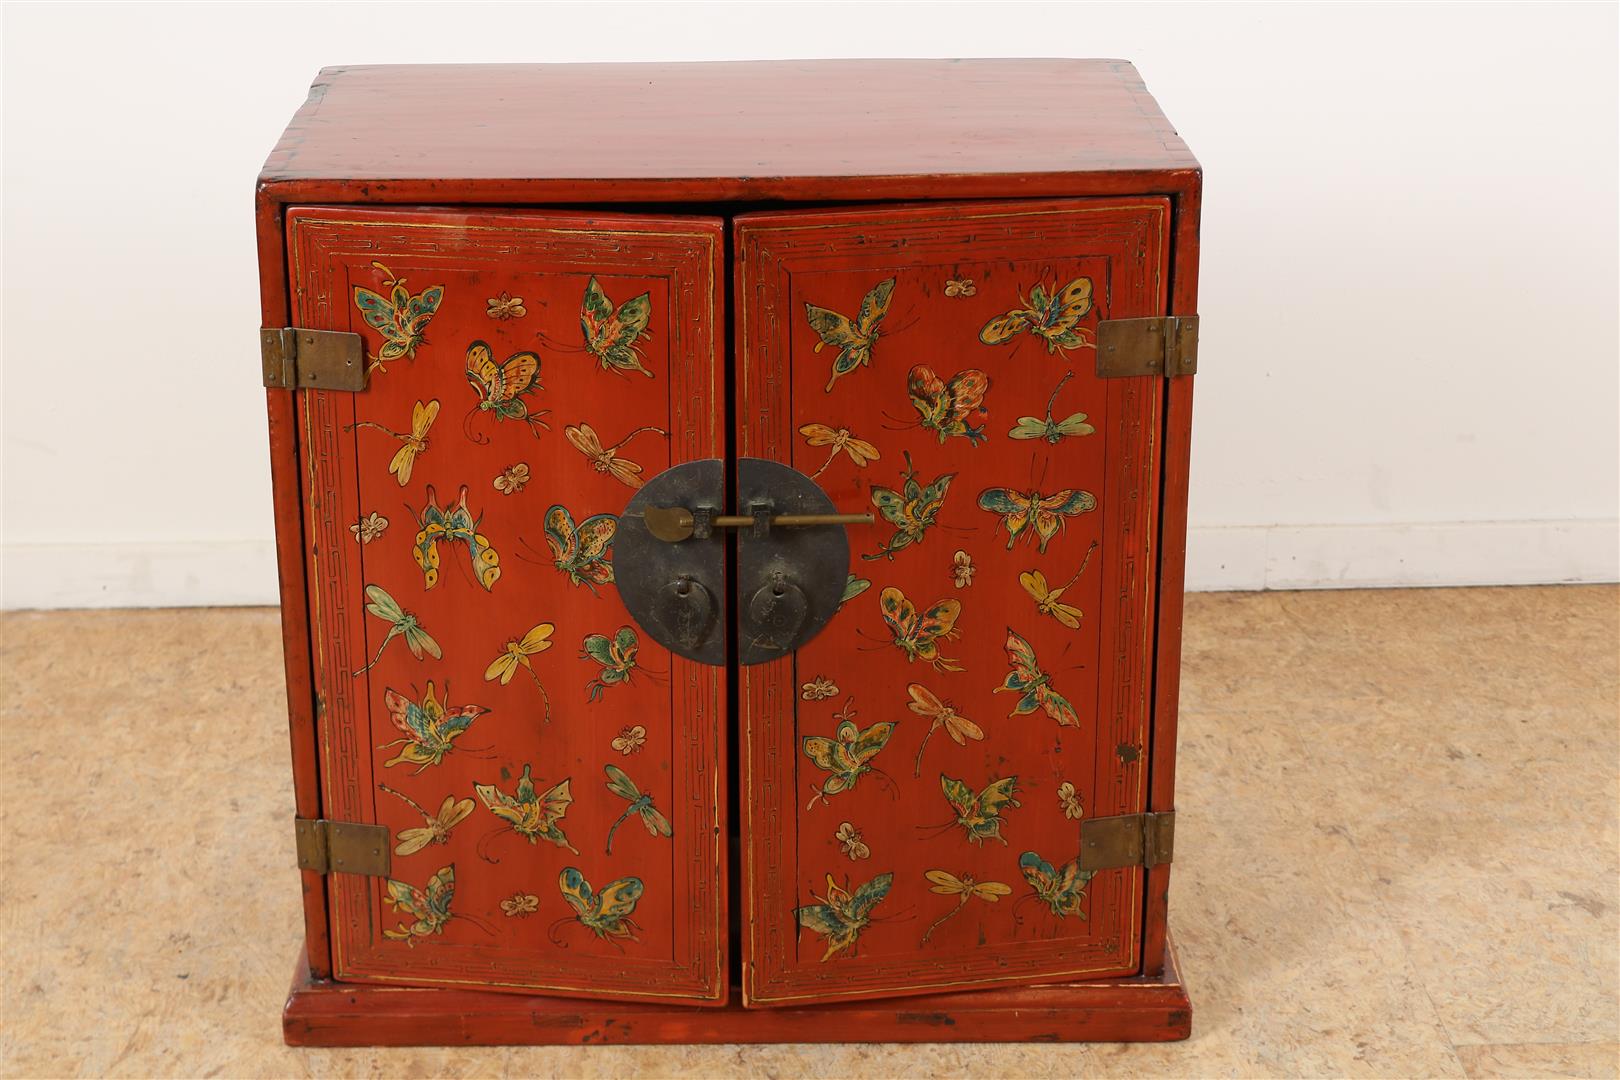 Red lacquer elm wood carrying cabinet with decor of gilded butterflies (called "Miao Jin") with 2